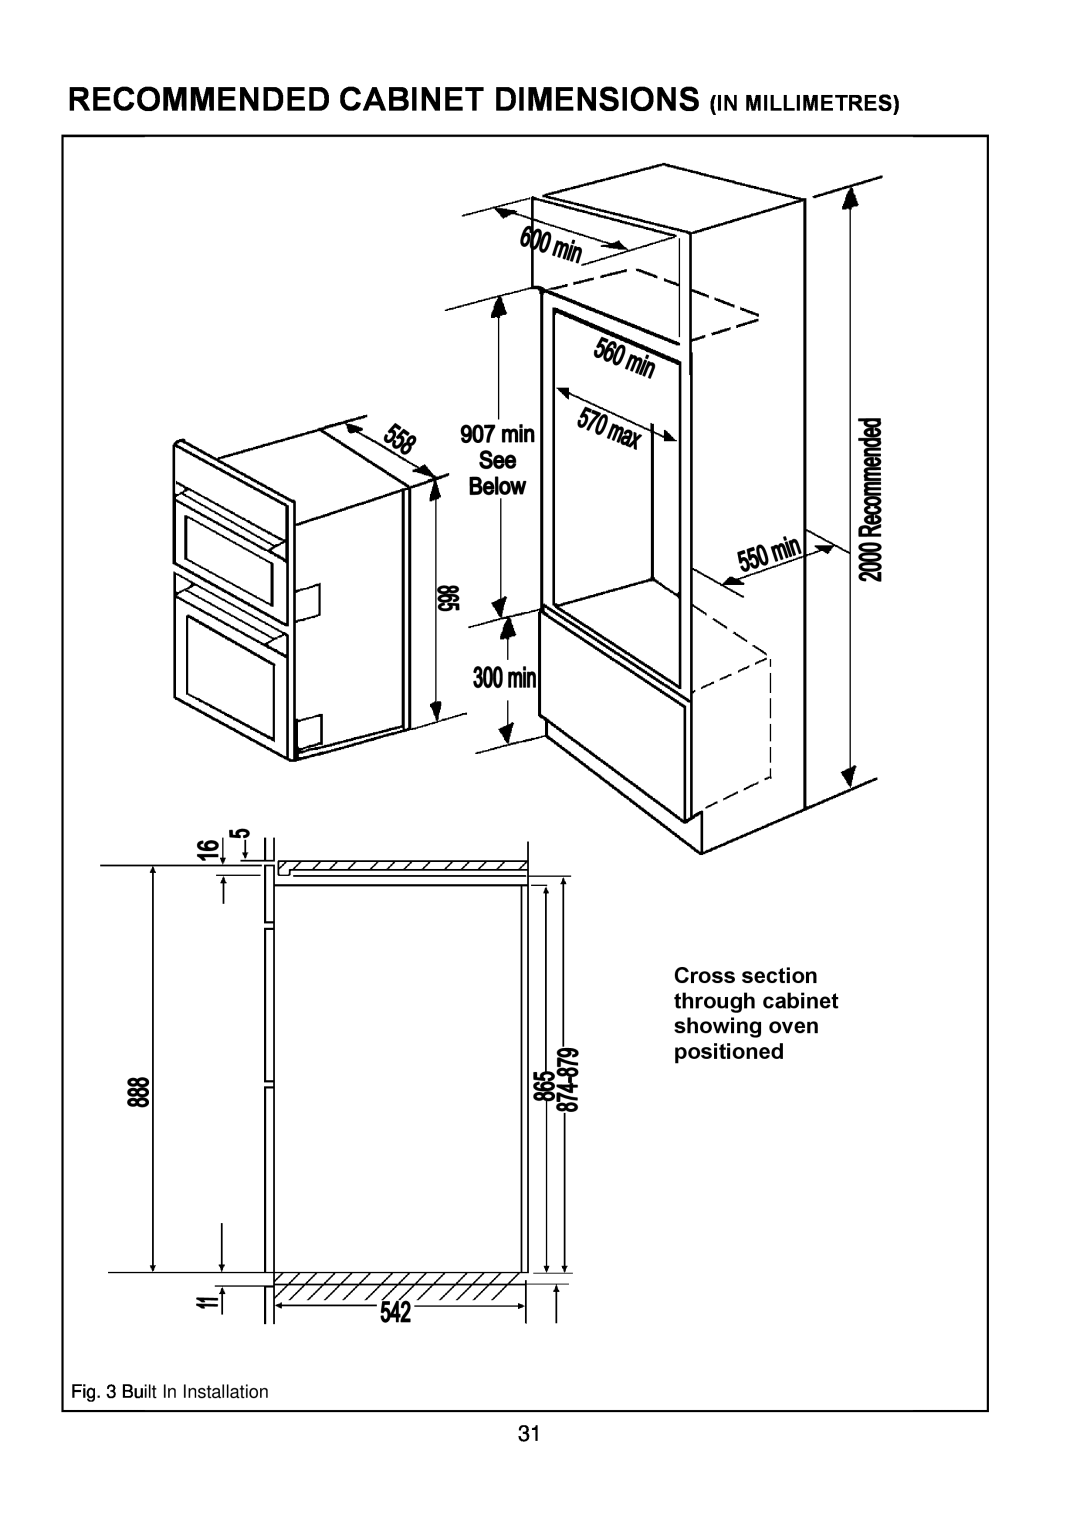 Zanussi ZOD 330 manual Recommended Cabinet Dimensions In Millimetres, Built In Installation 